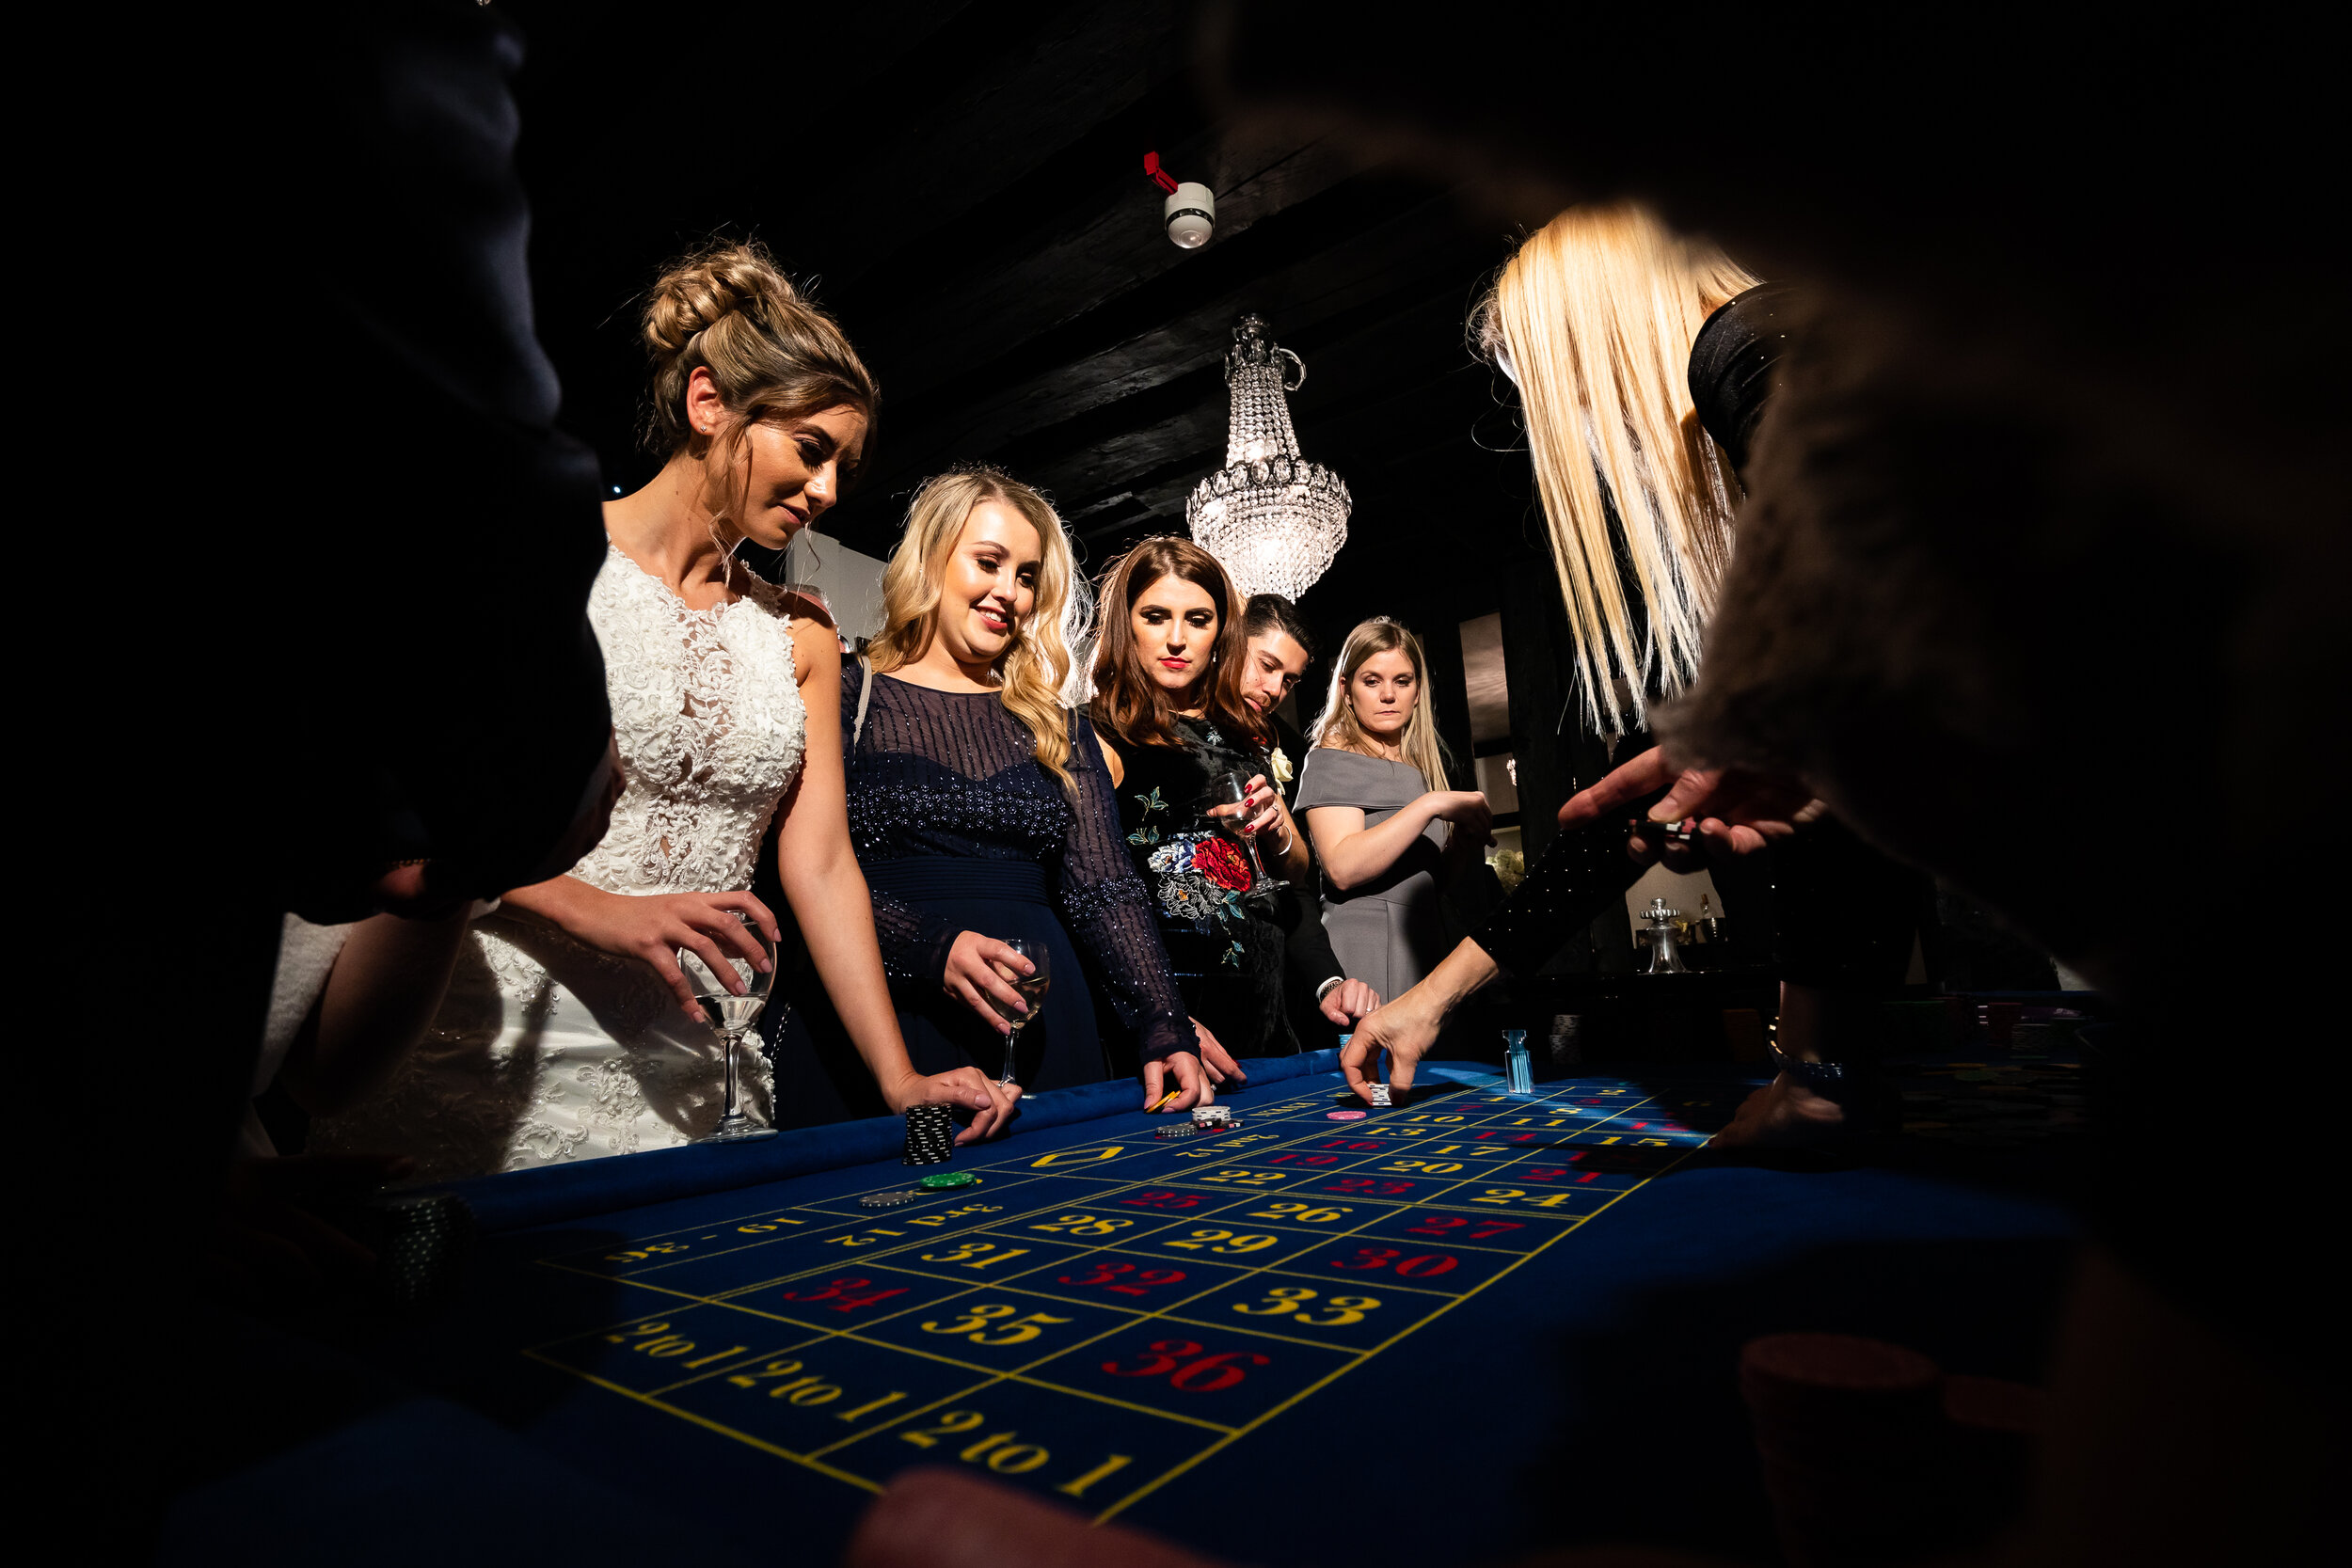 Casino Table at event